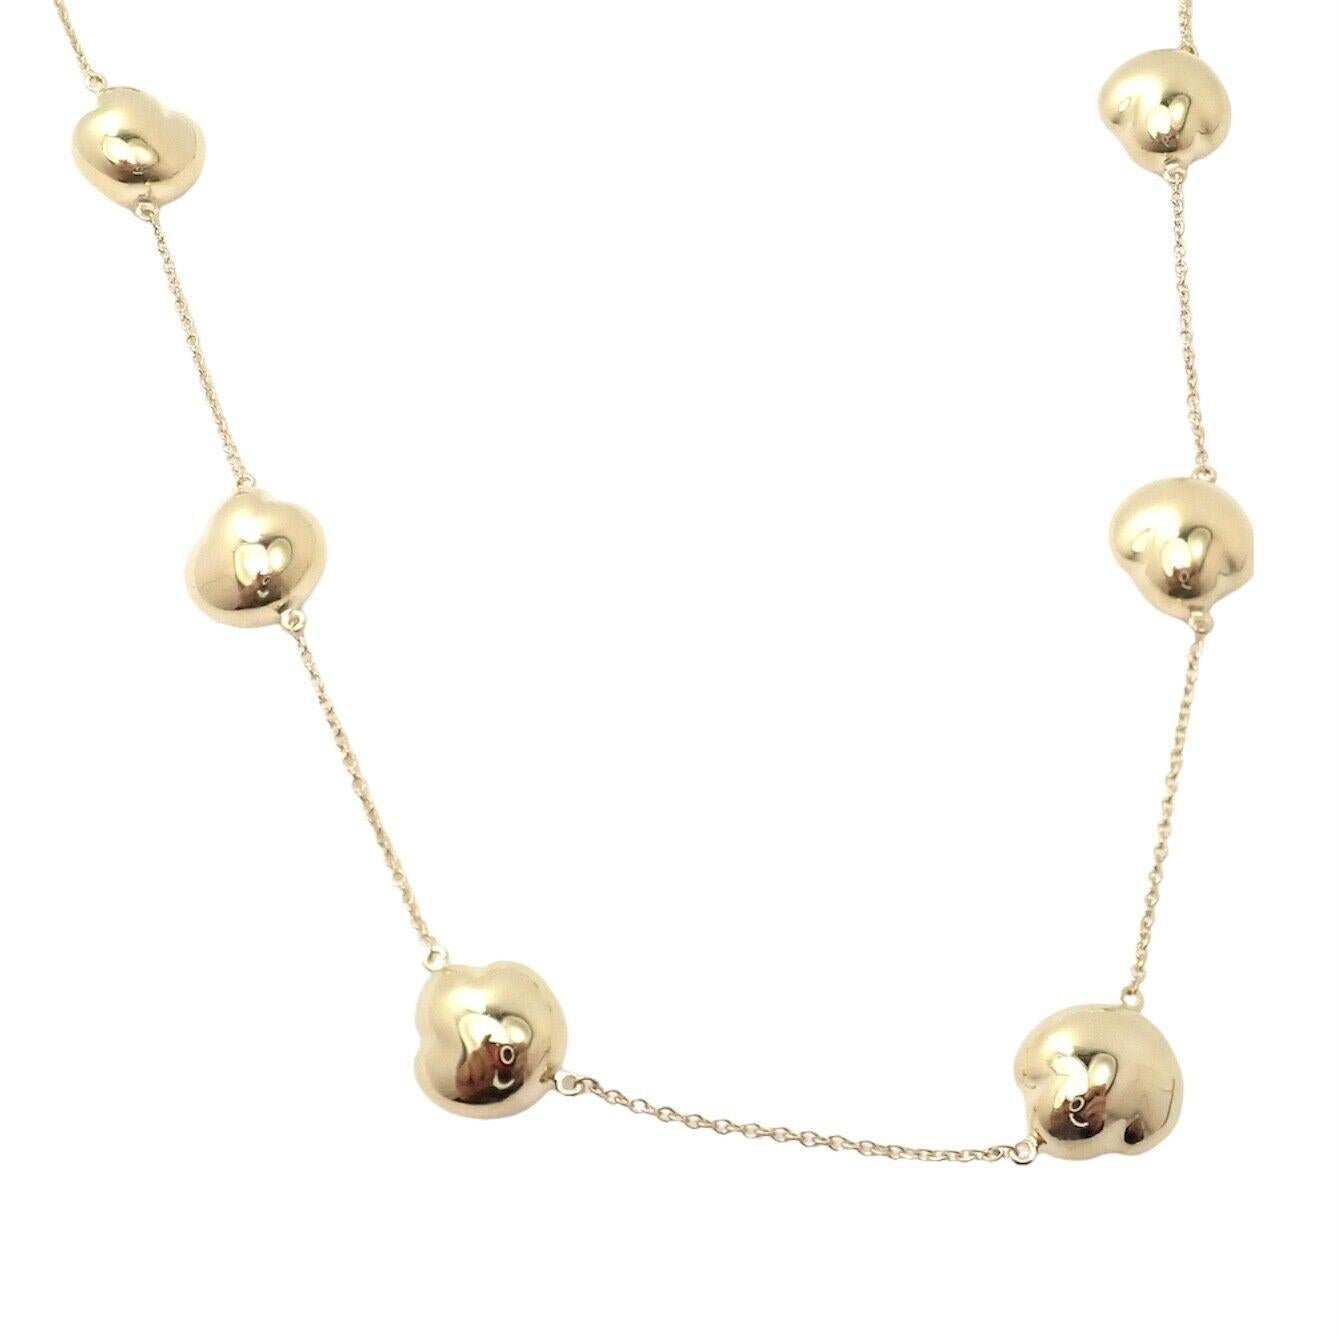 18k Yellow Gold Bean Necklace by Elsa Peretti for Tiffany & Co.
Details:
Length: 14.5